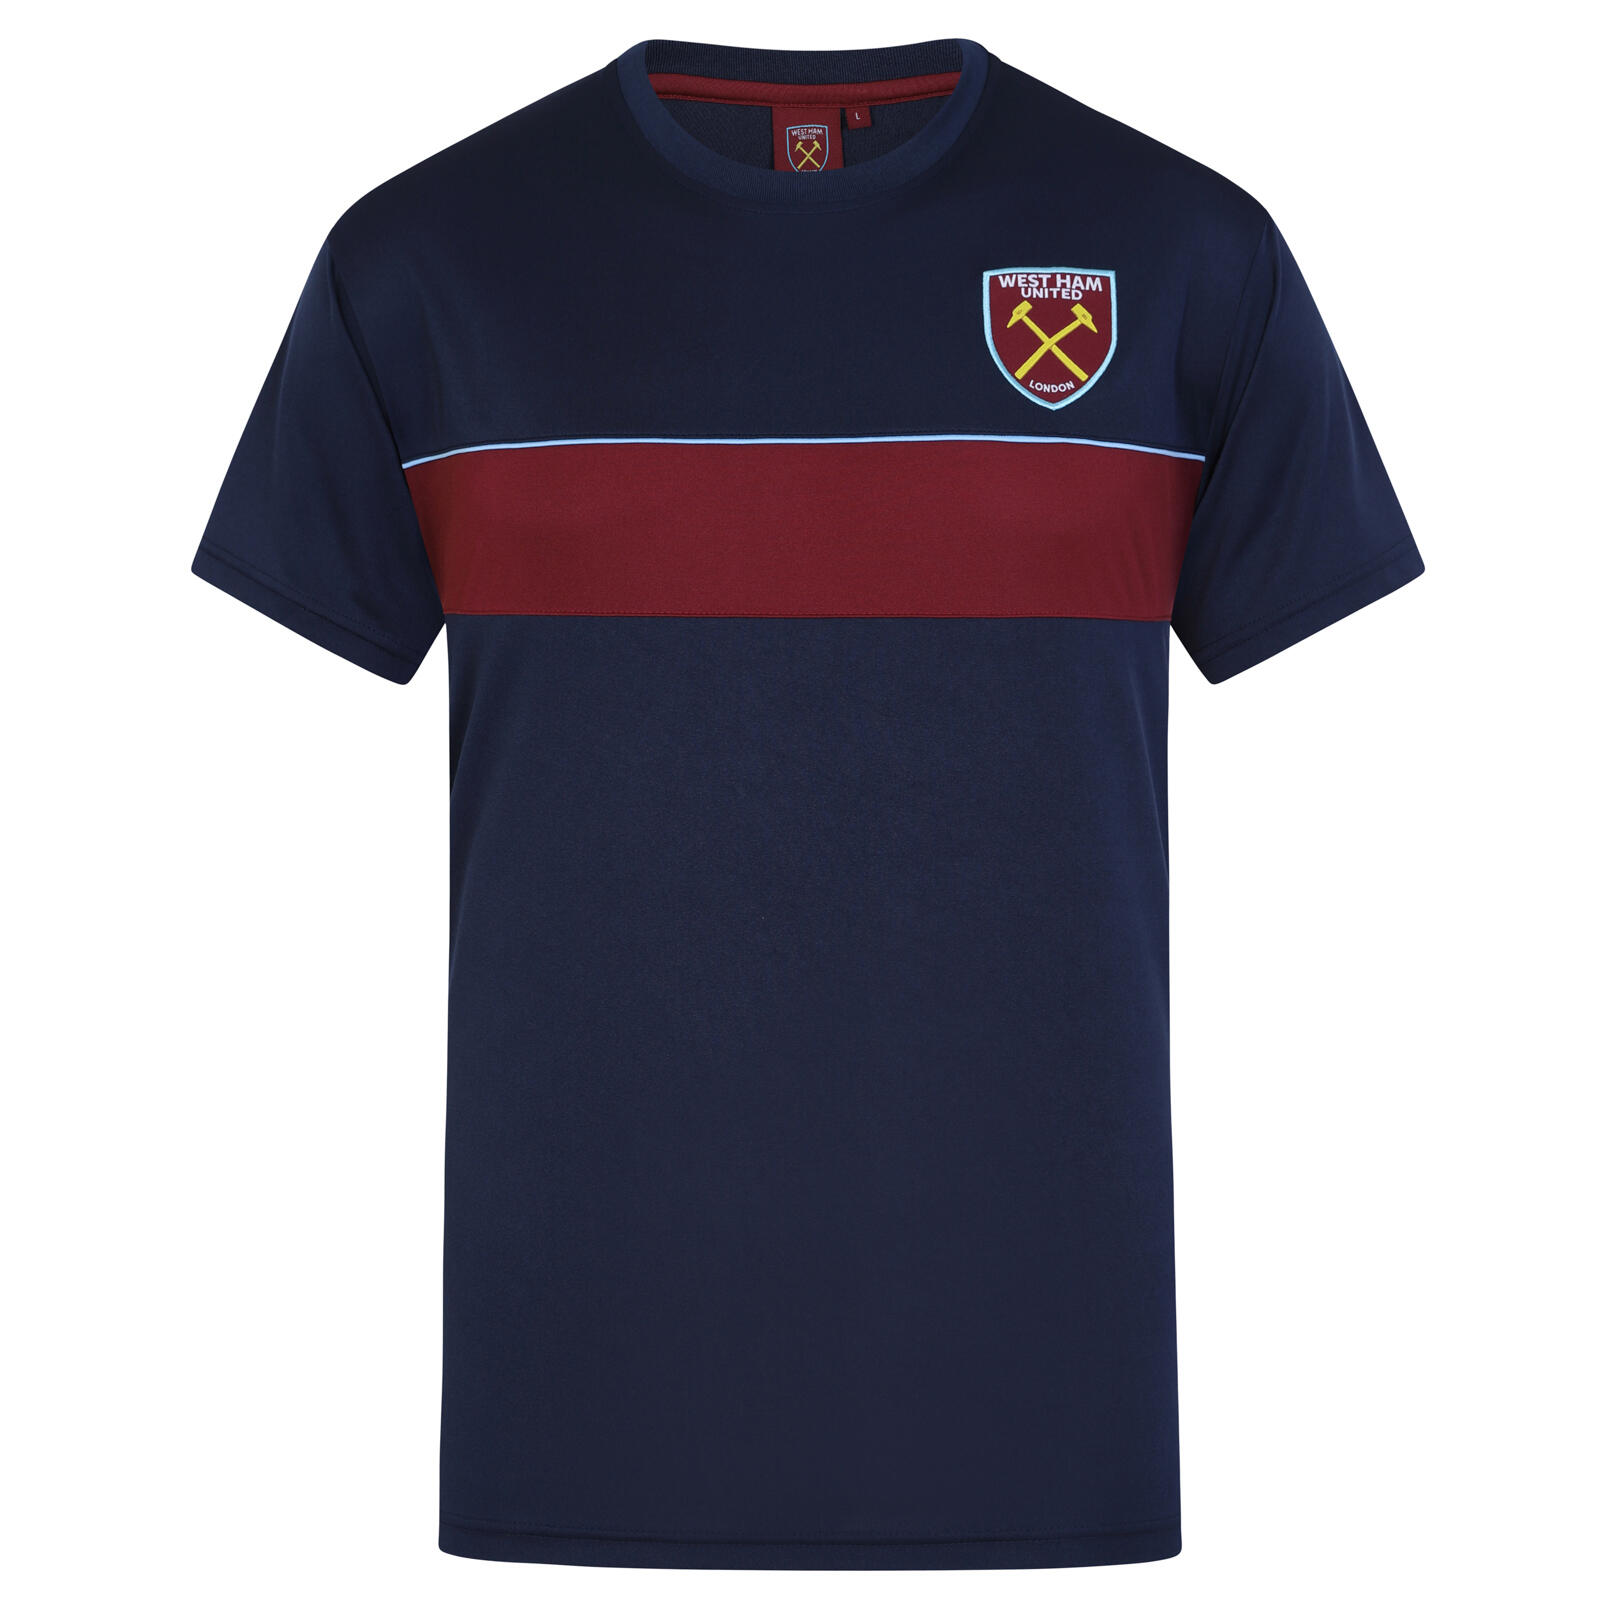 WEST HAM UNITED West Ham United Mens T-Shirt Poly Training Kit OFFICIAL Football Gift